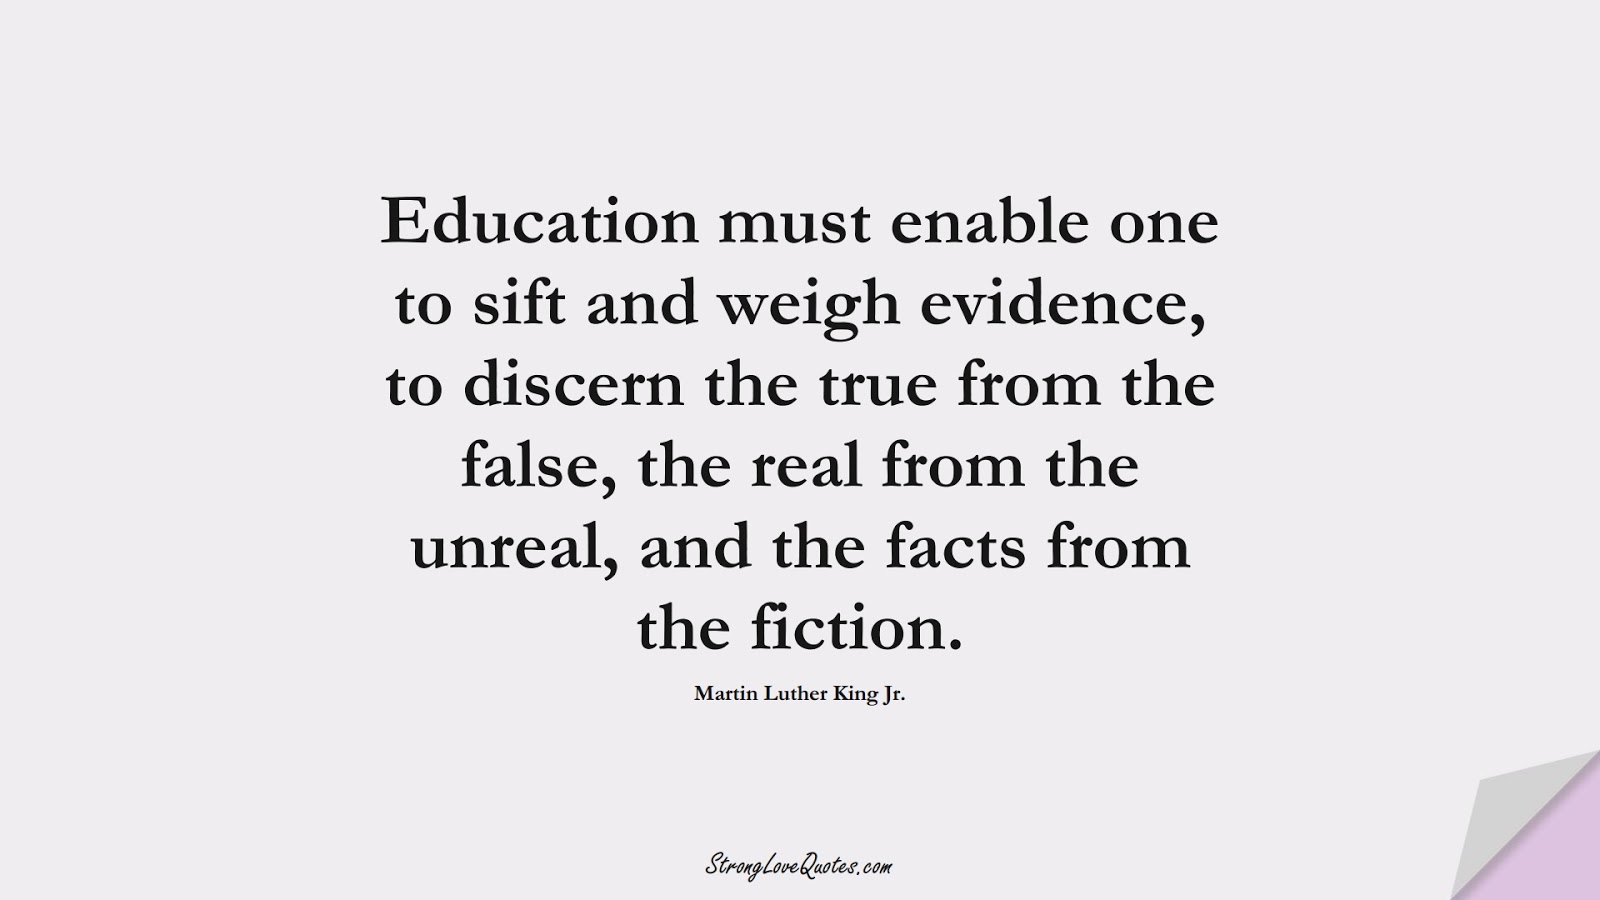 Education must enable one to sift and weigh evidence, to discern the true from the false, the real from the unreal, and the facts from the fiction. (Martin Luther King Jr.);  #EducationQuotes